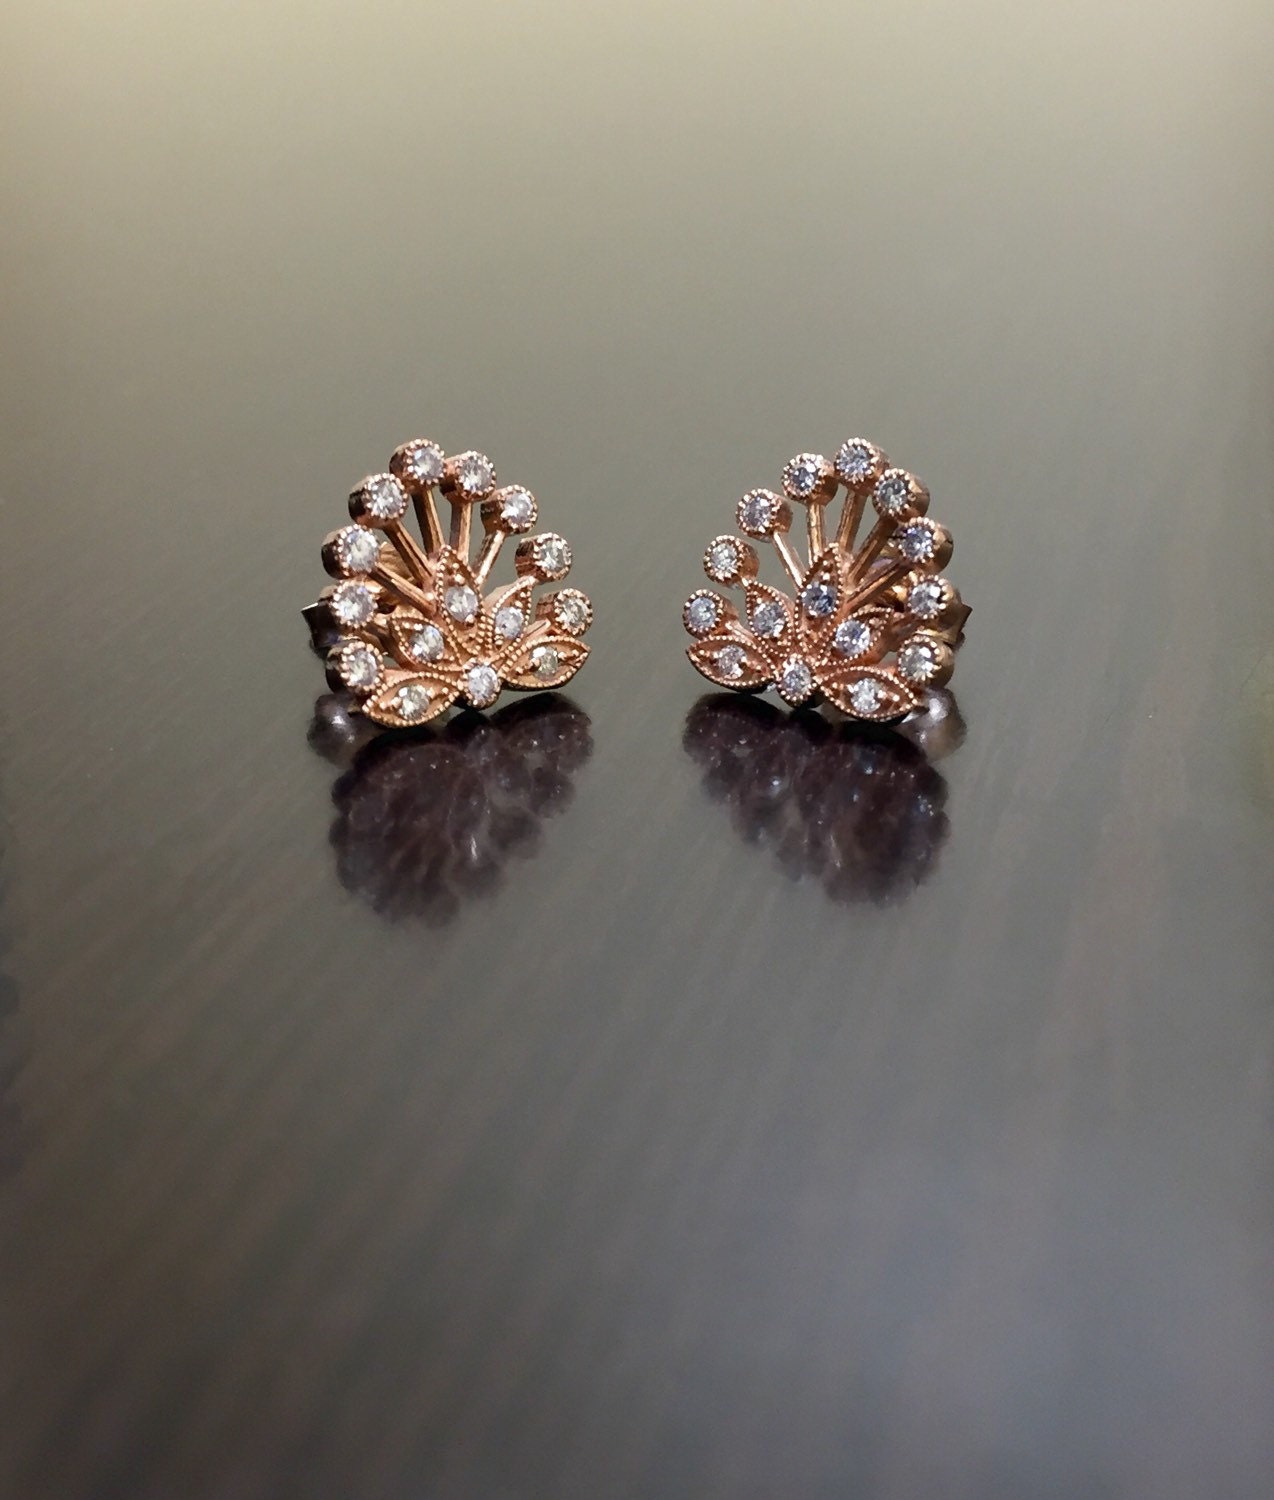 Buy Earrings Online - Premium Quality - South India Jewels